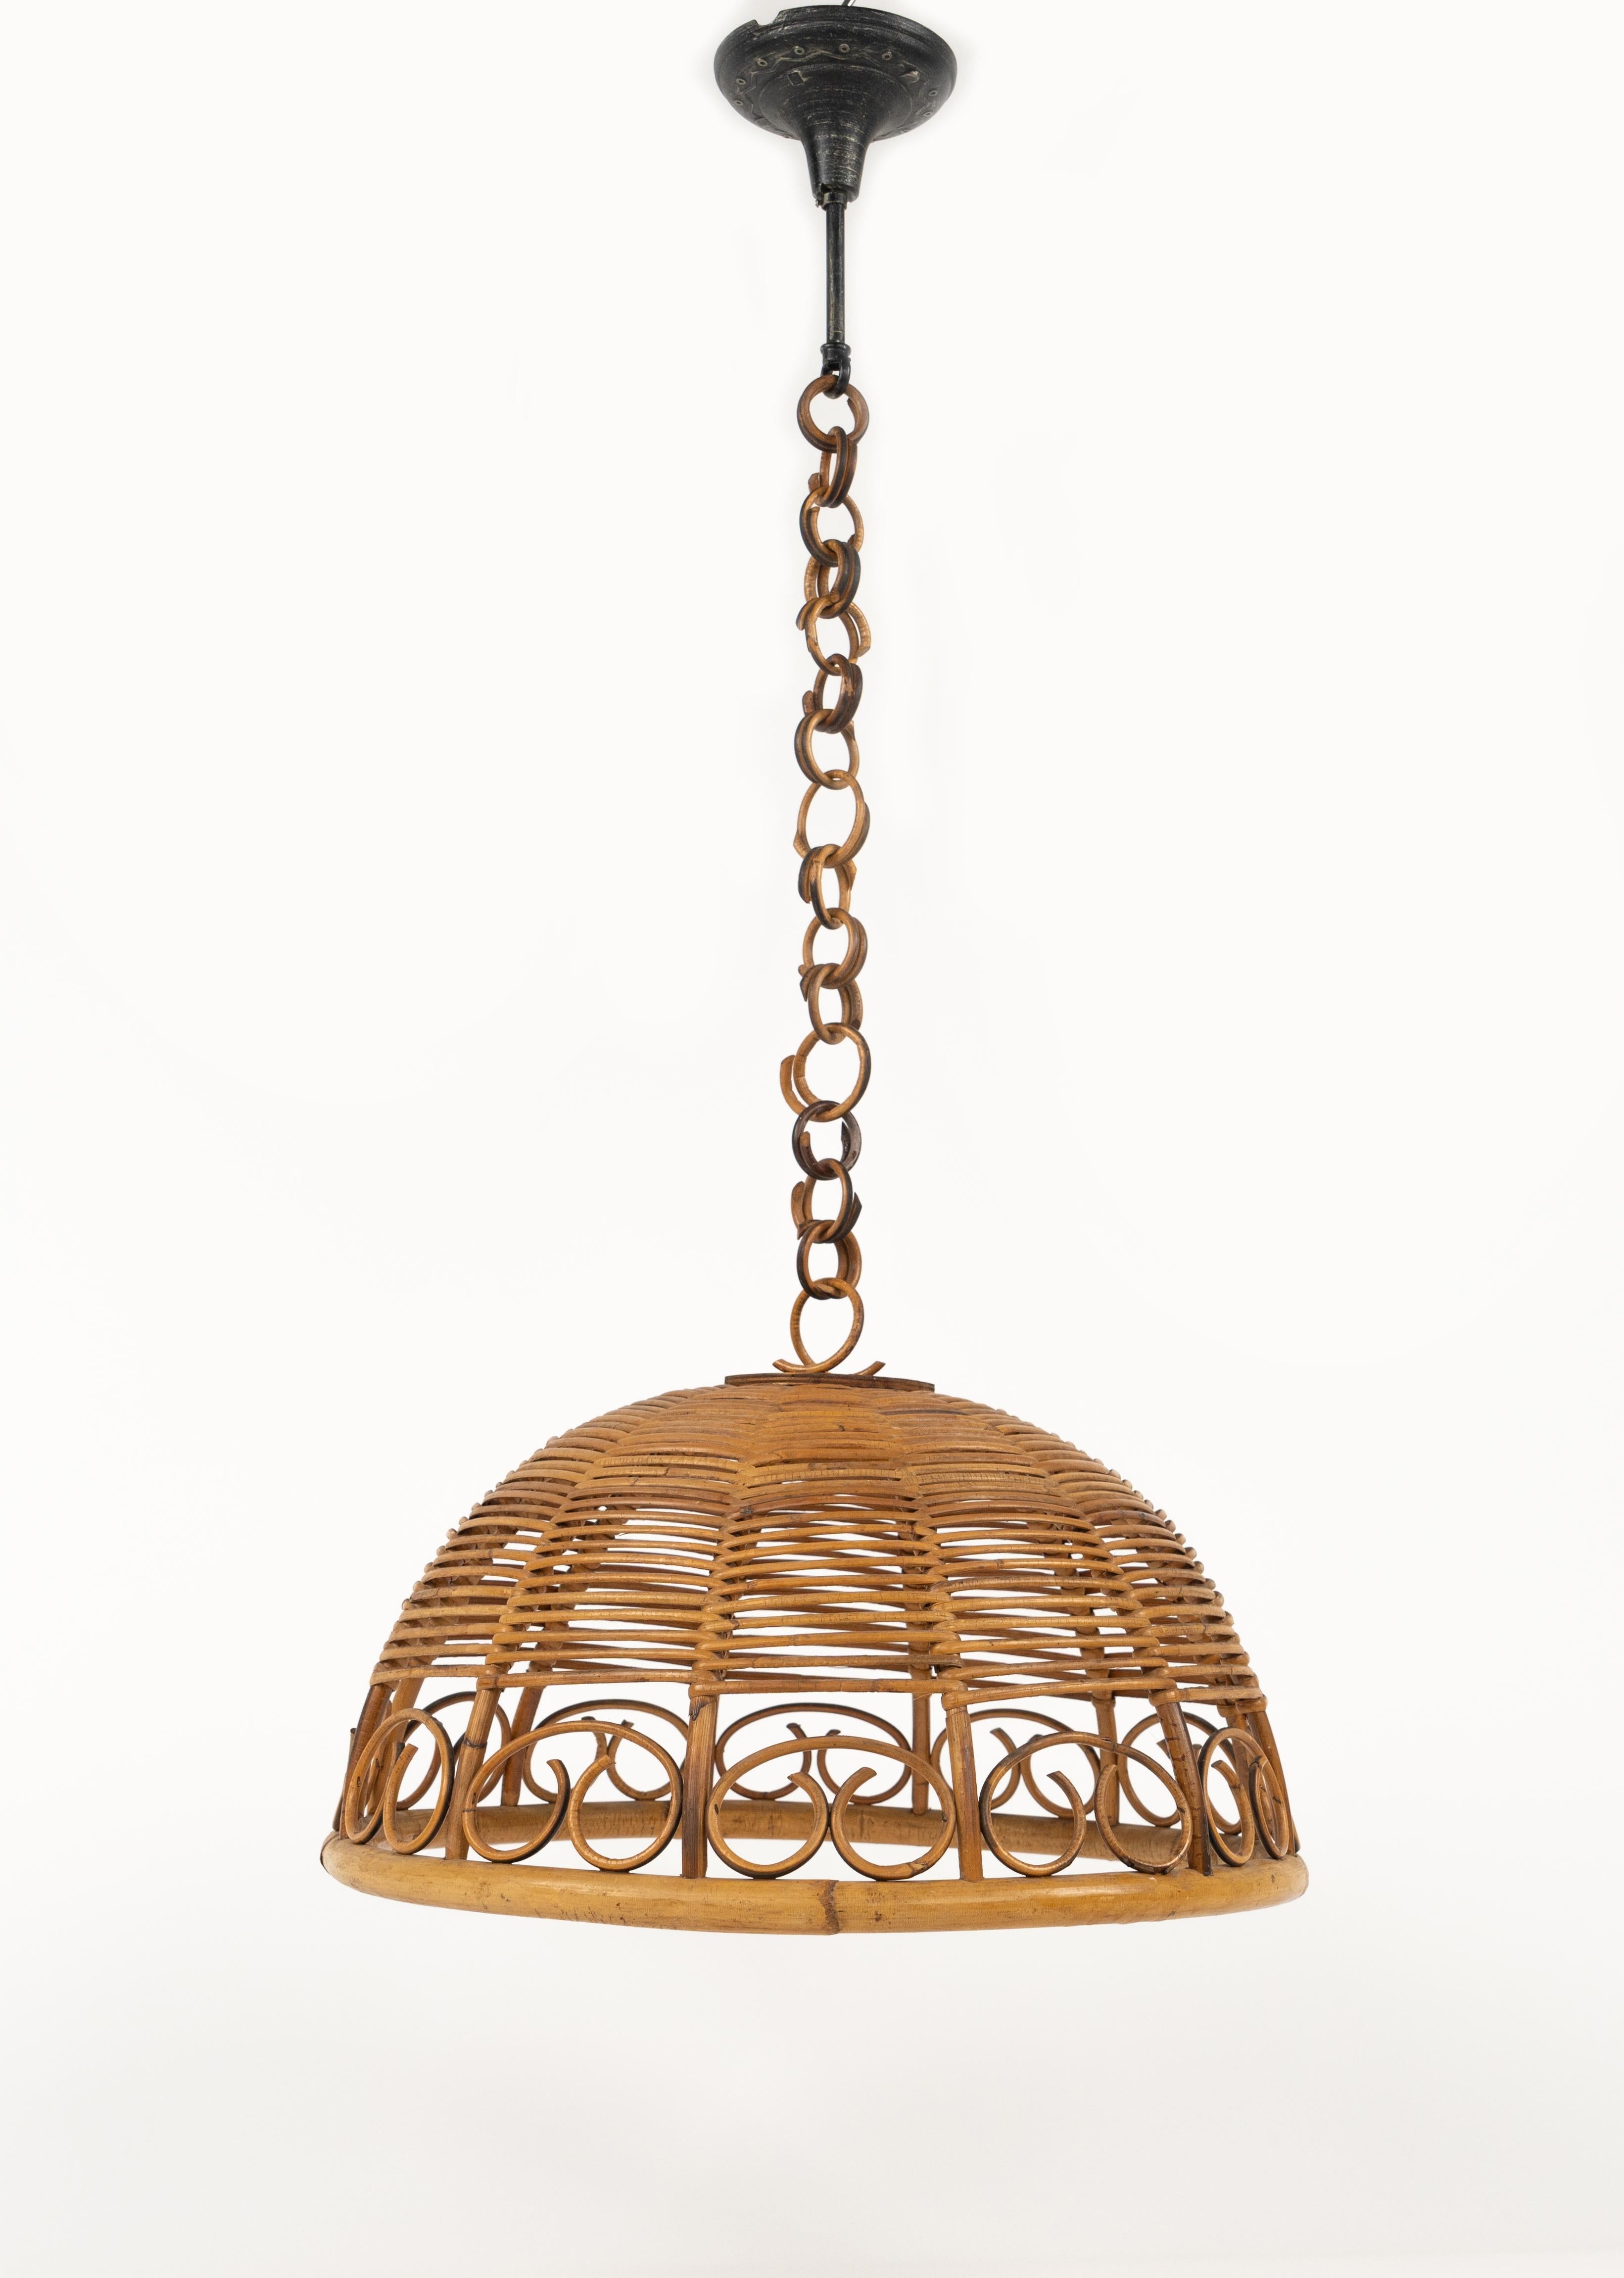 Midcentury Rattan and Bamboo Chandelier Pendant, Italy 1960s For Sale 1